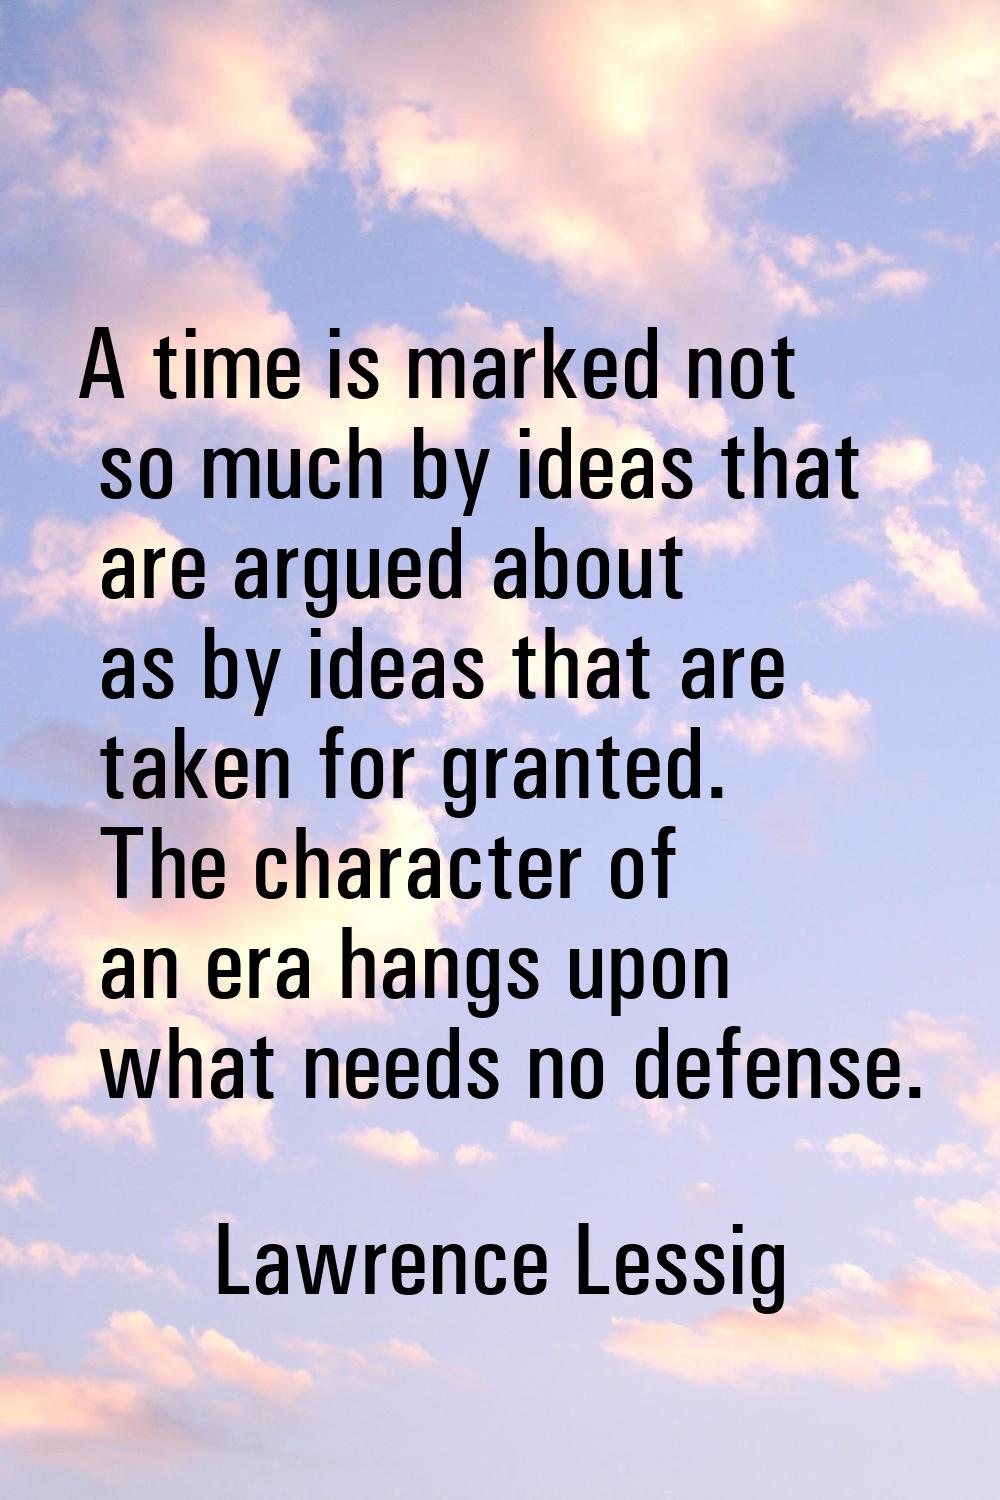 A time is marked not so much by ideas that are argued about as by ideas that are taken for granted.